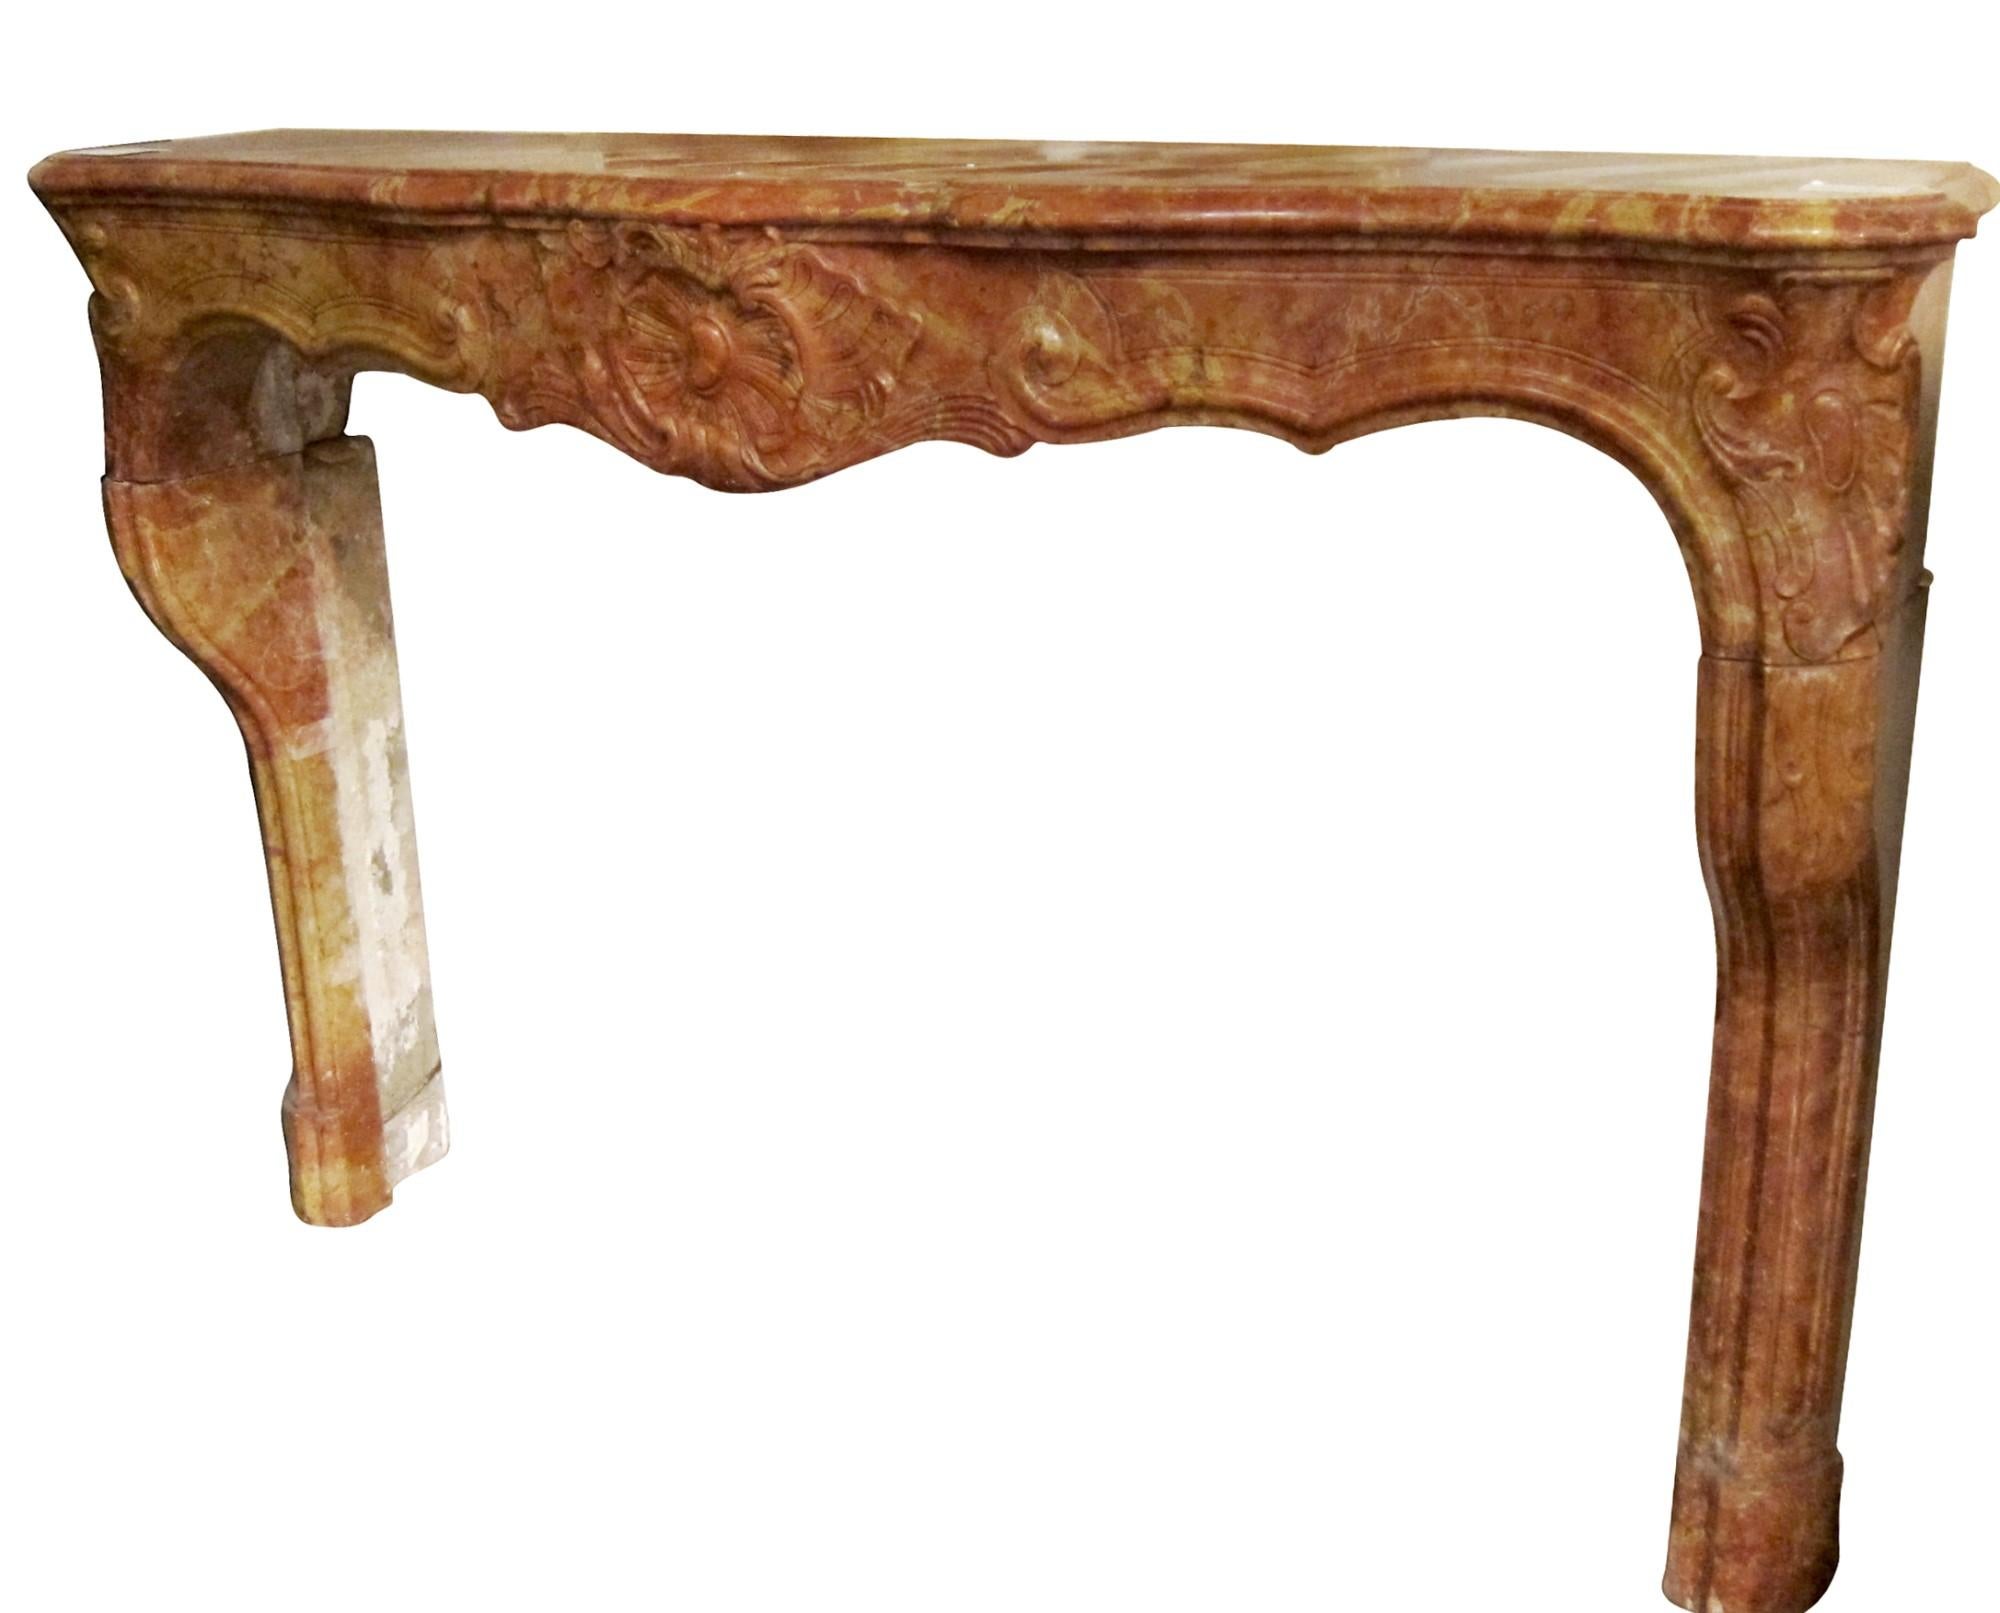 Circa 18th Century carved marble mantel from France. This stone mantel has a country feel and features burgundy and reddish orange coloring with caramel veining. Please note, this item is located in our Scranton, PA location.
 